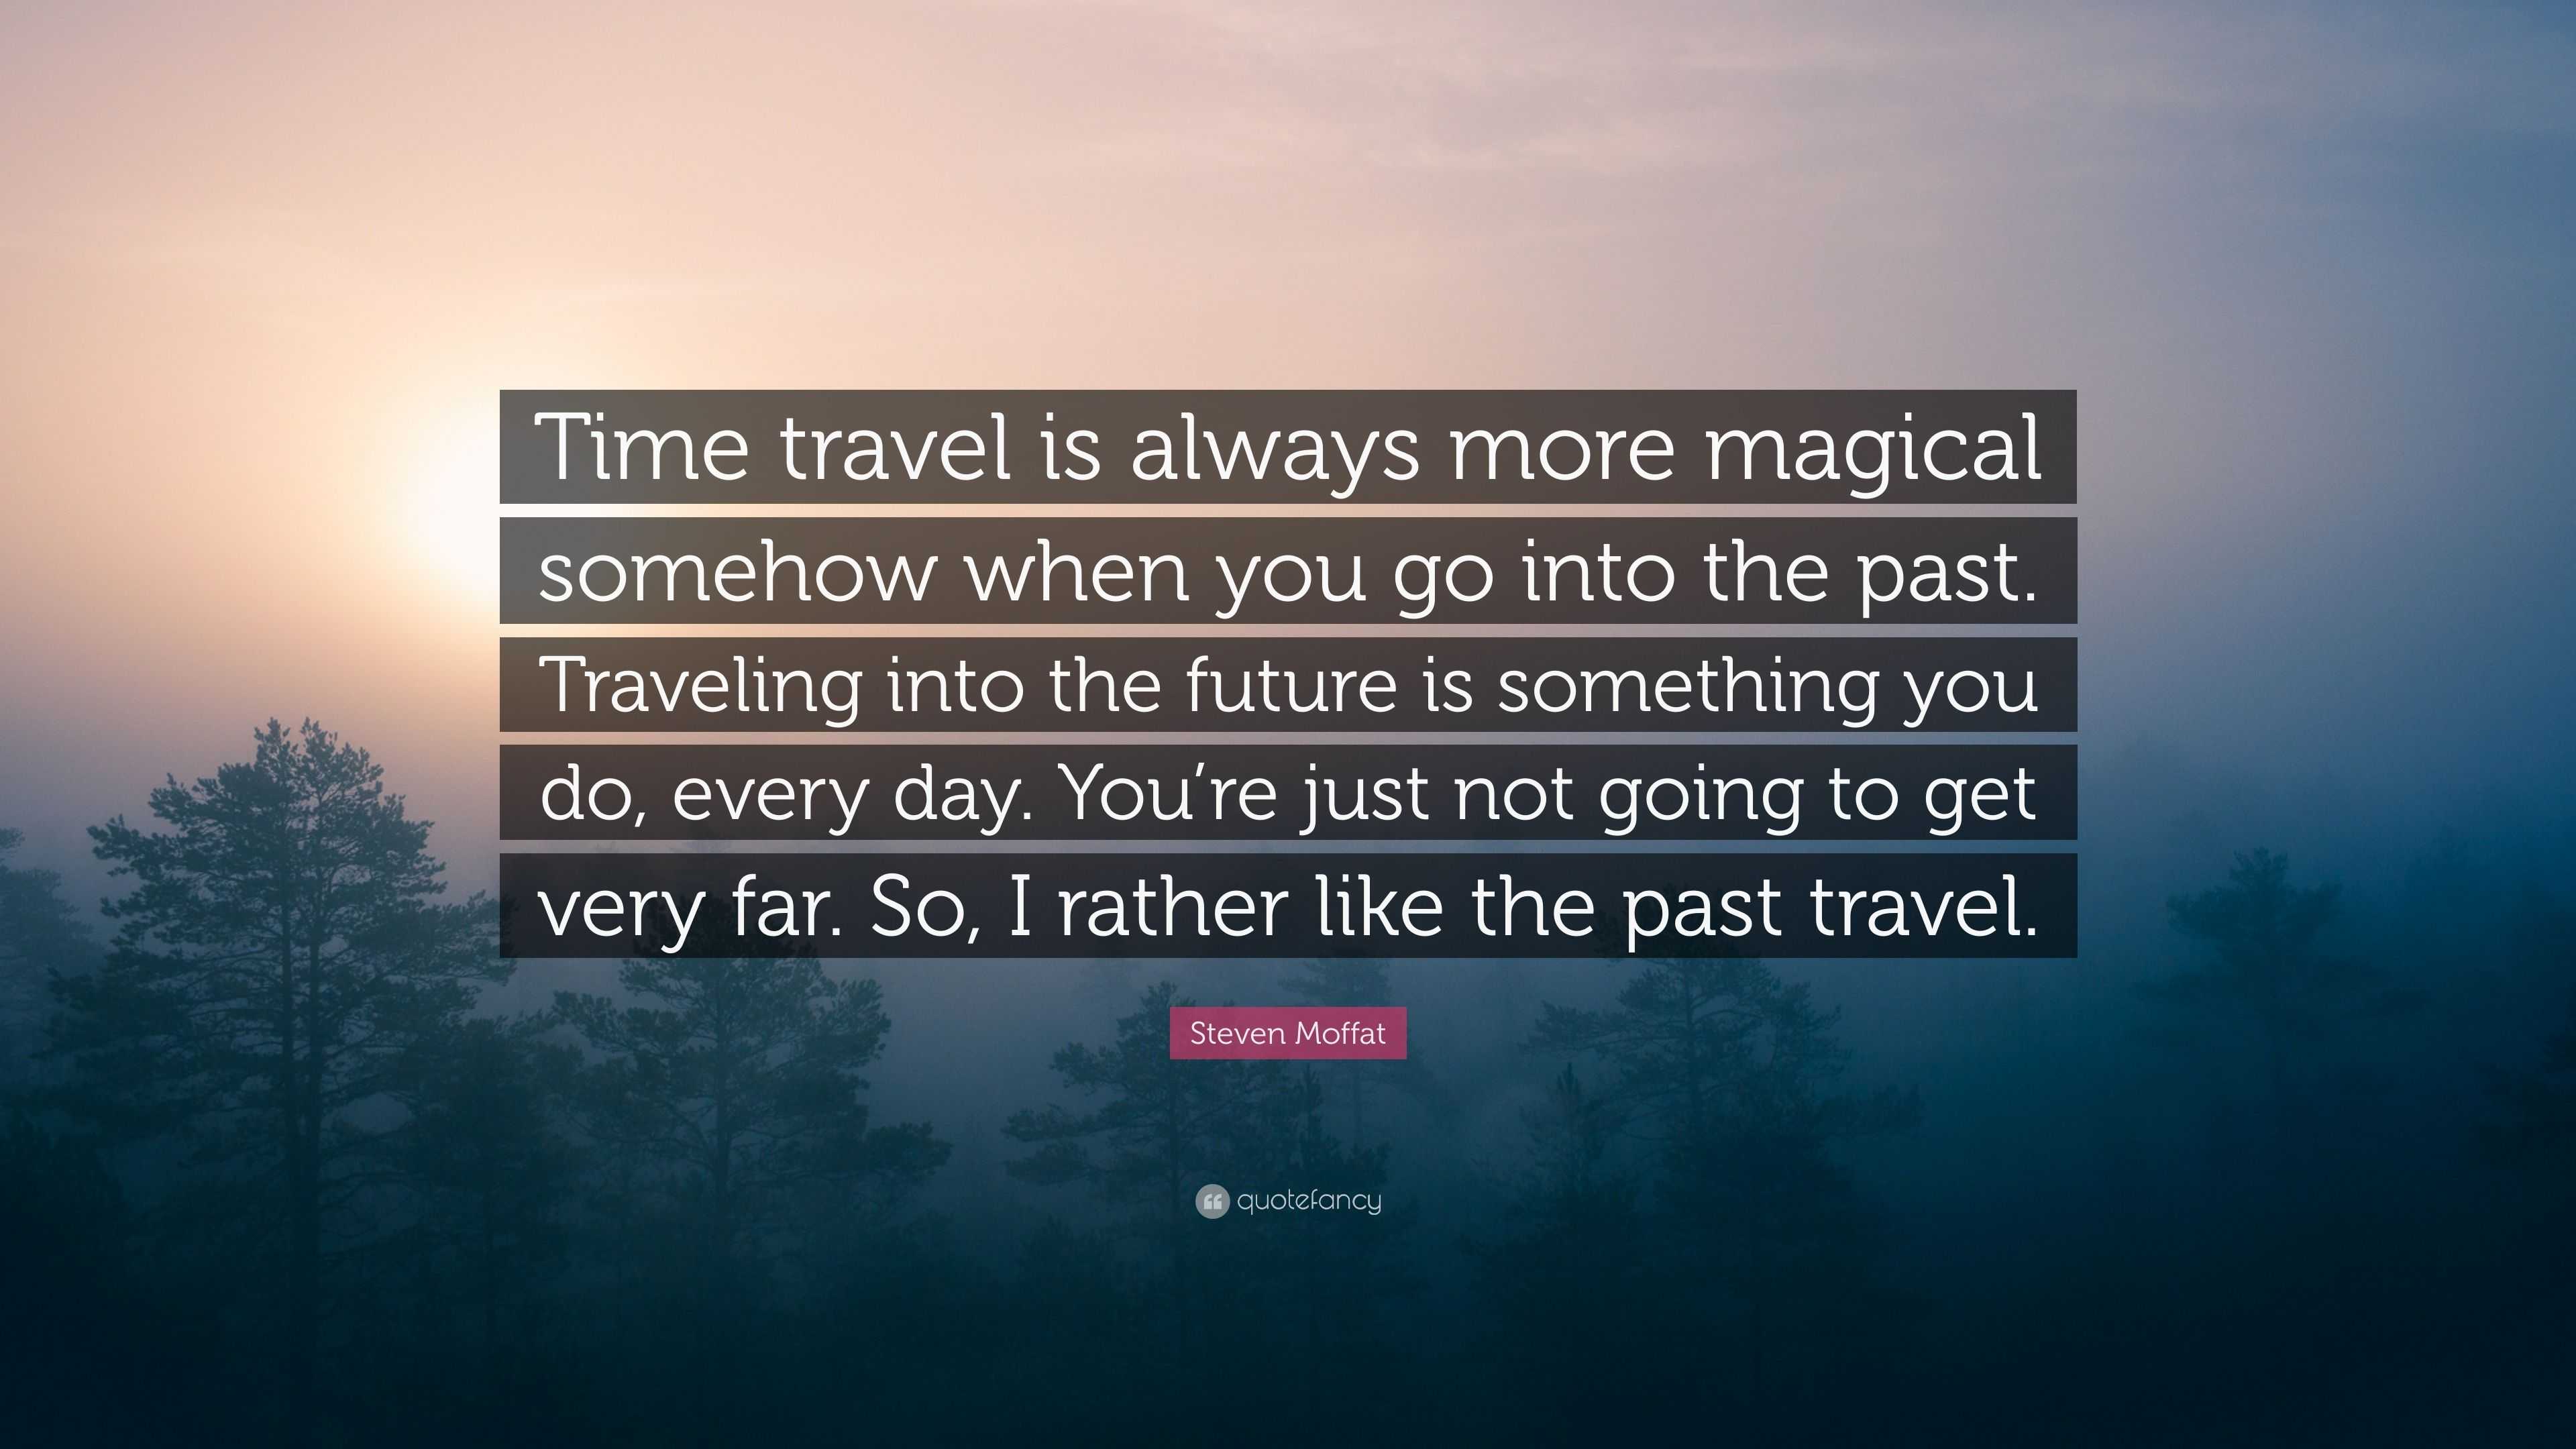 famous quotes about time travel